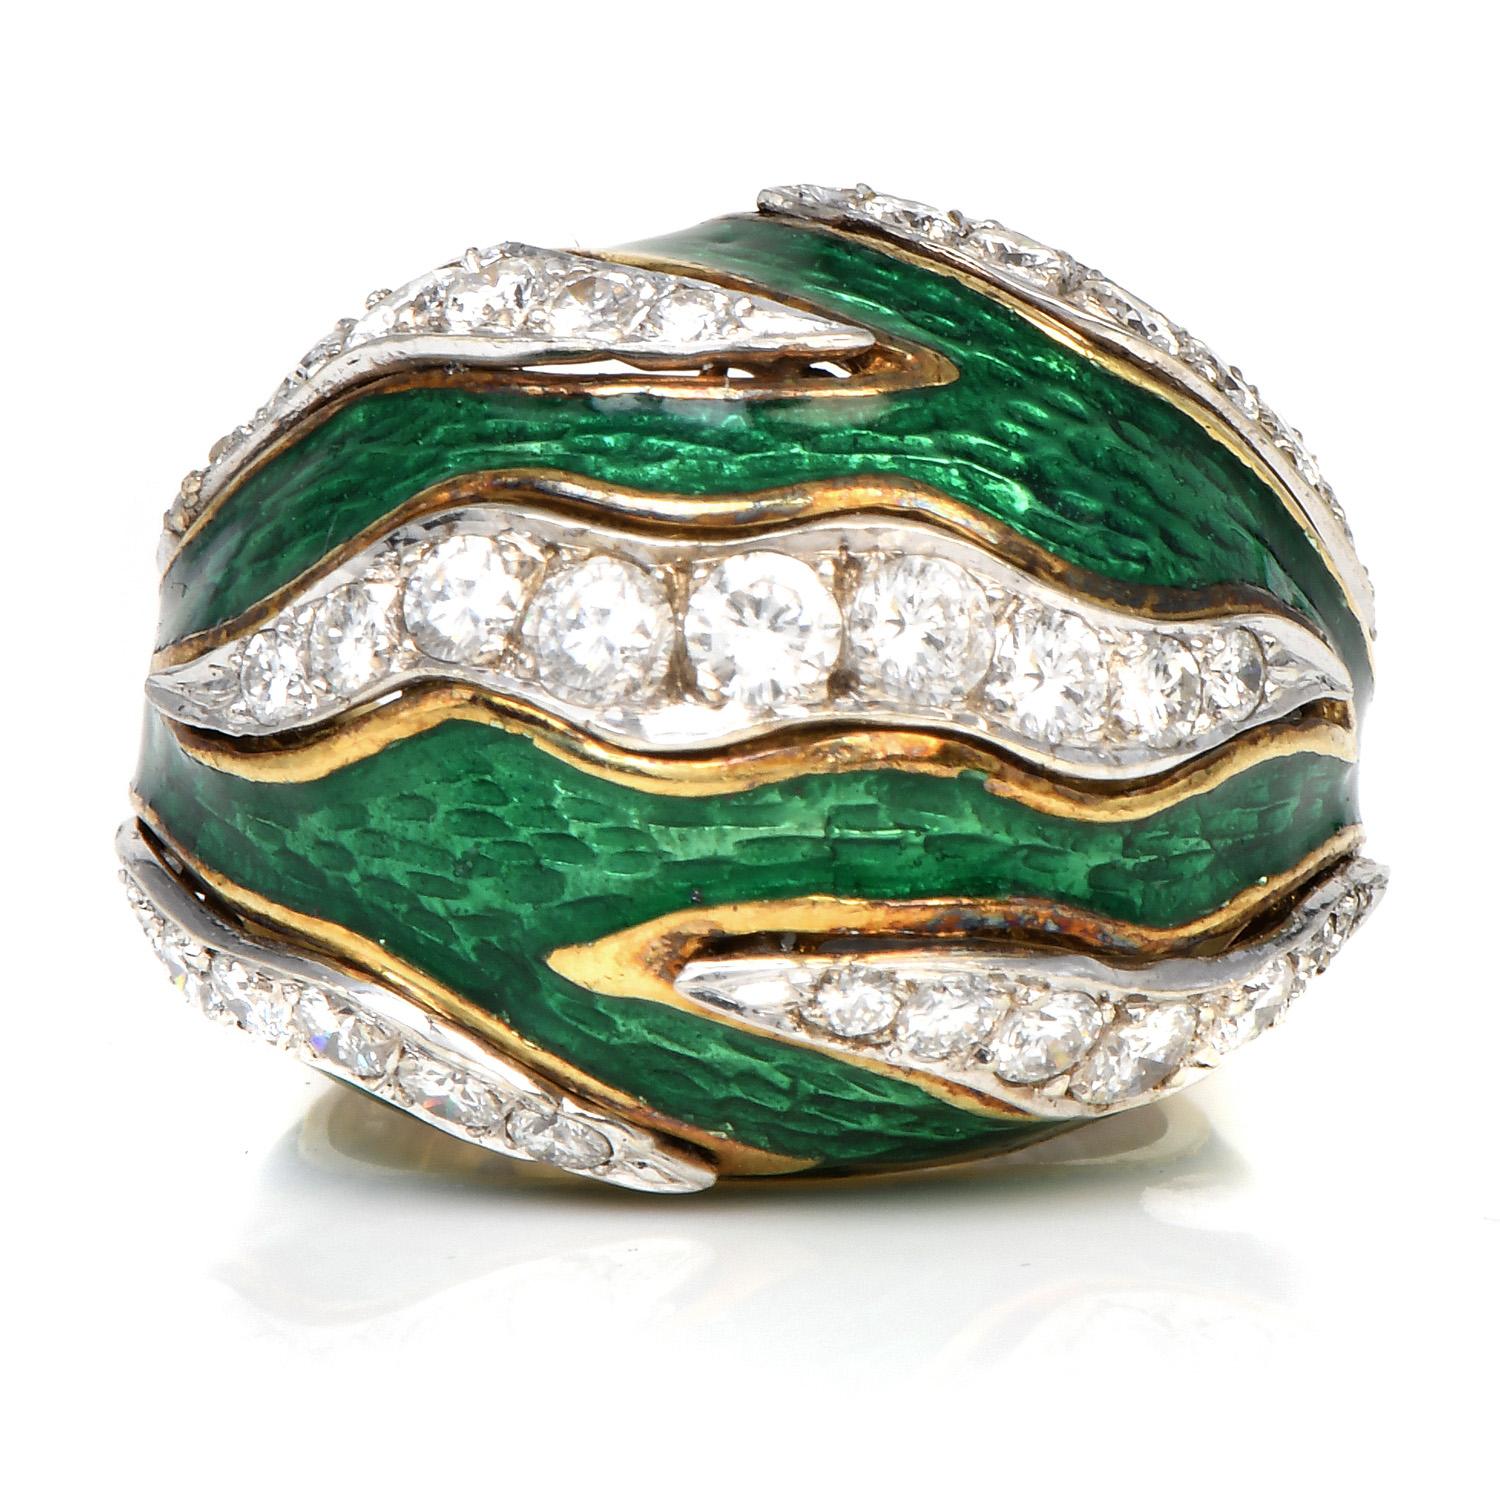 his regal design will captivate everyone!

This Vintage 1950's ring, Features textured Green Enameling accents, accented by a channeled pattern throughout of round brilliant cut diamonds.

With 37 natural genuine diamonds weigh cumulatively appx.